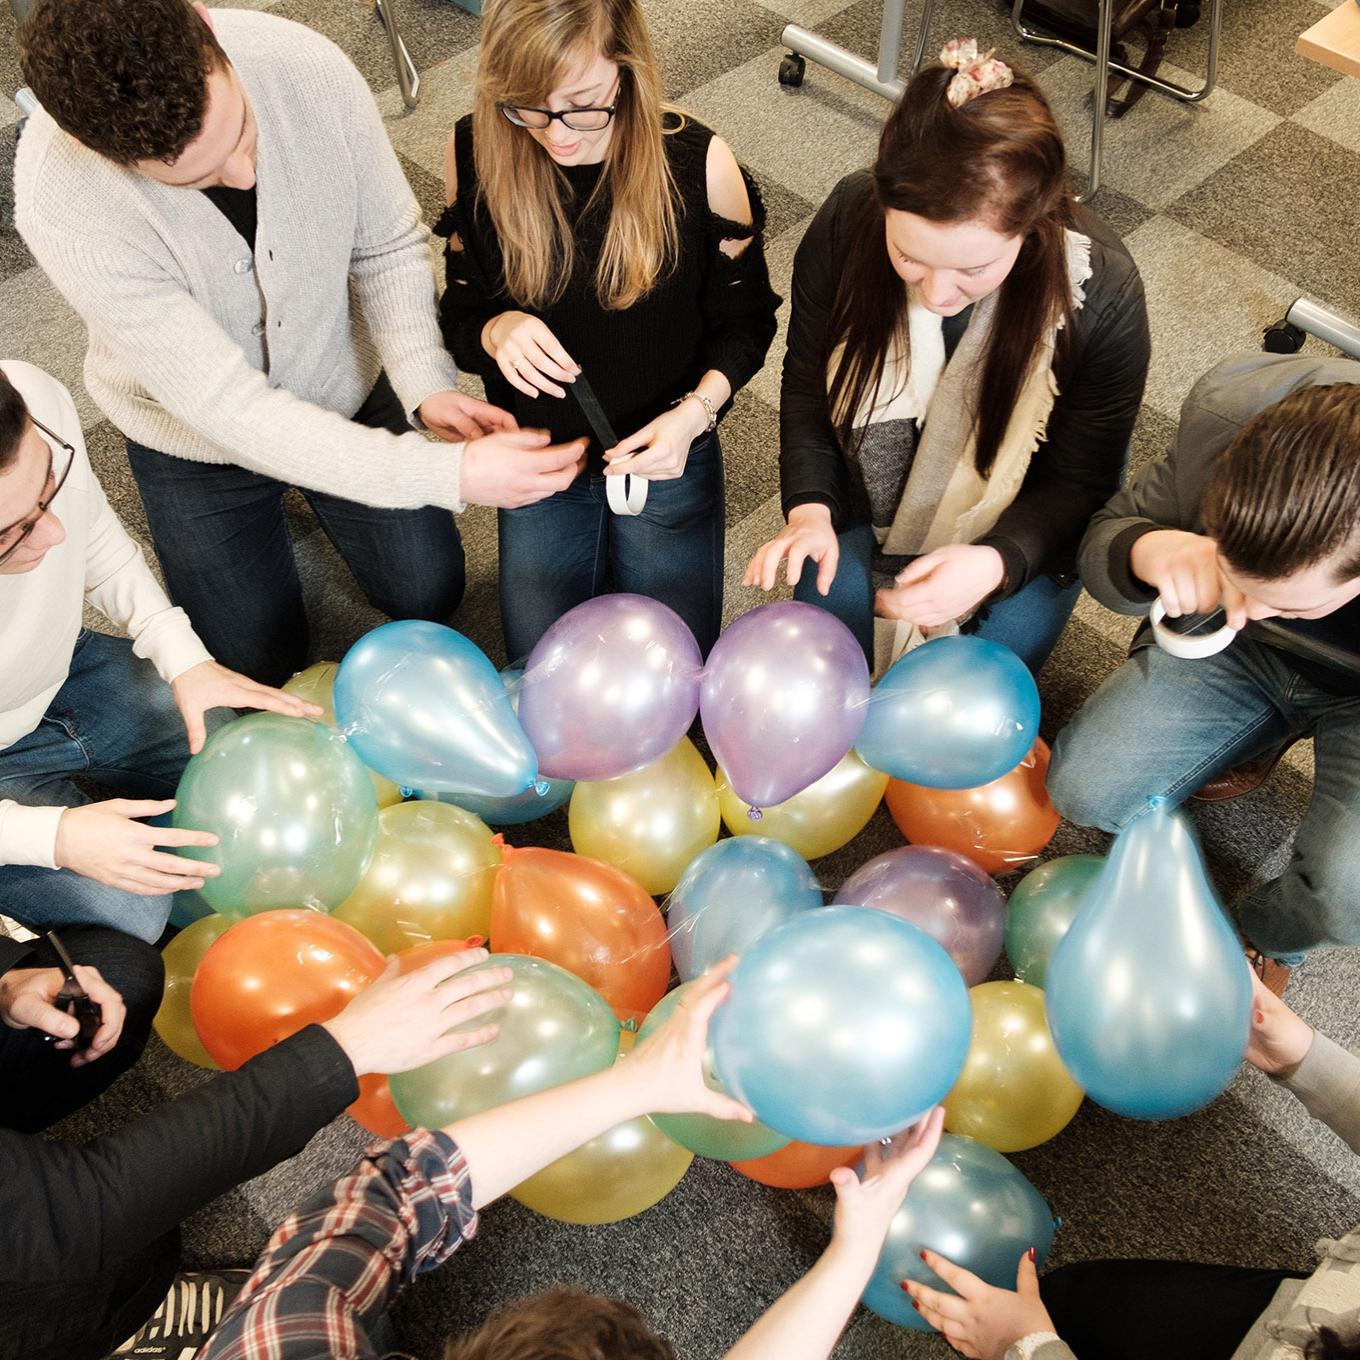 A group of students assemble balloons as part of a classroom task